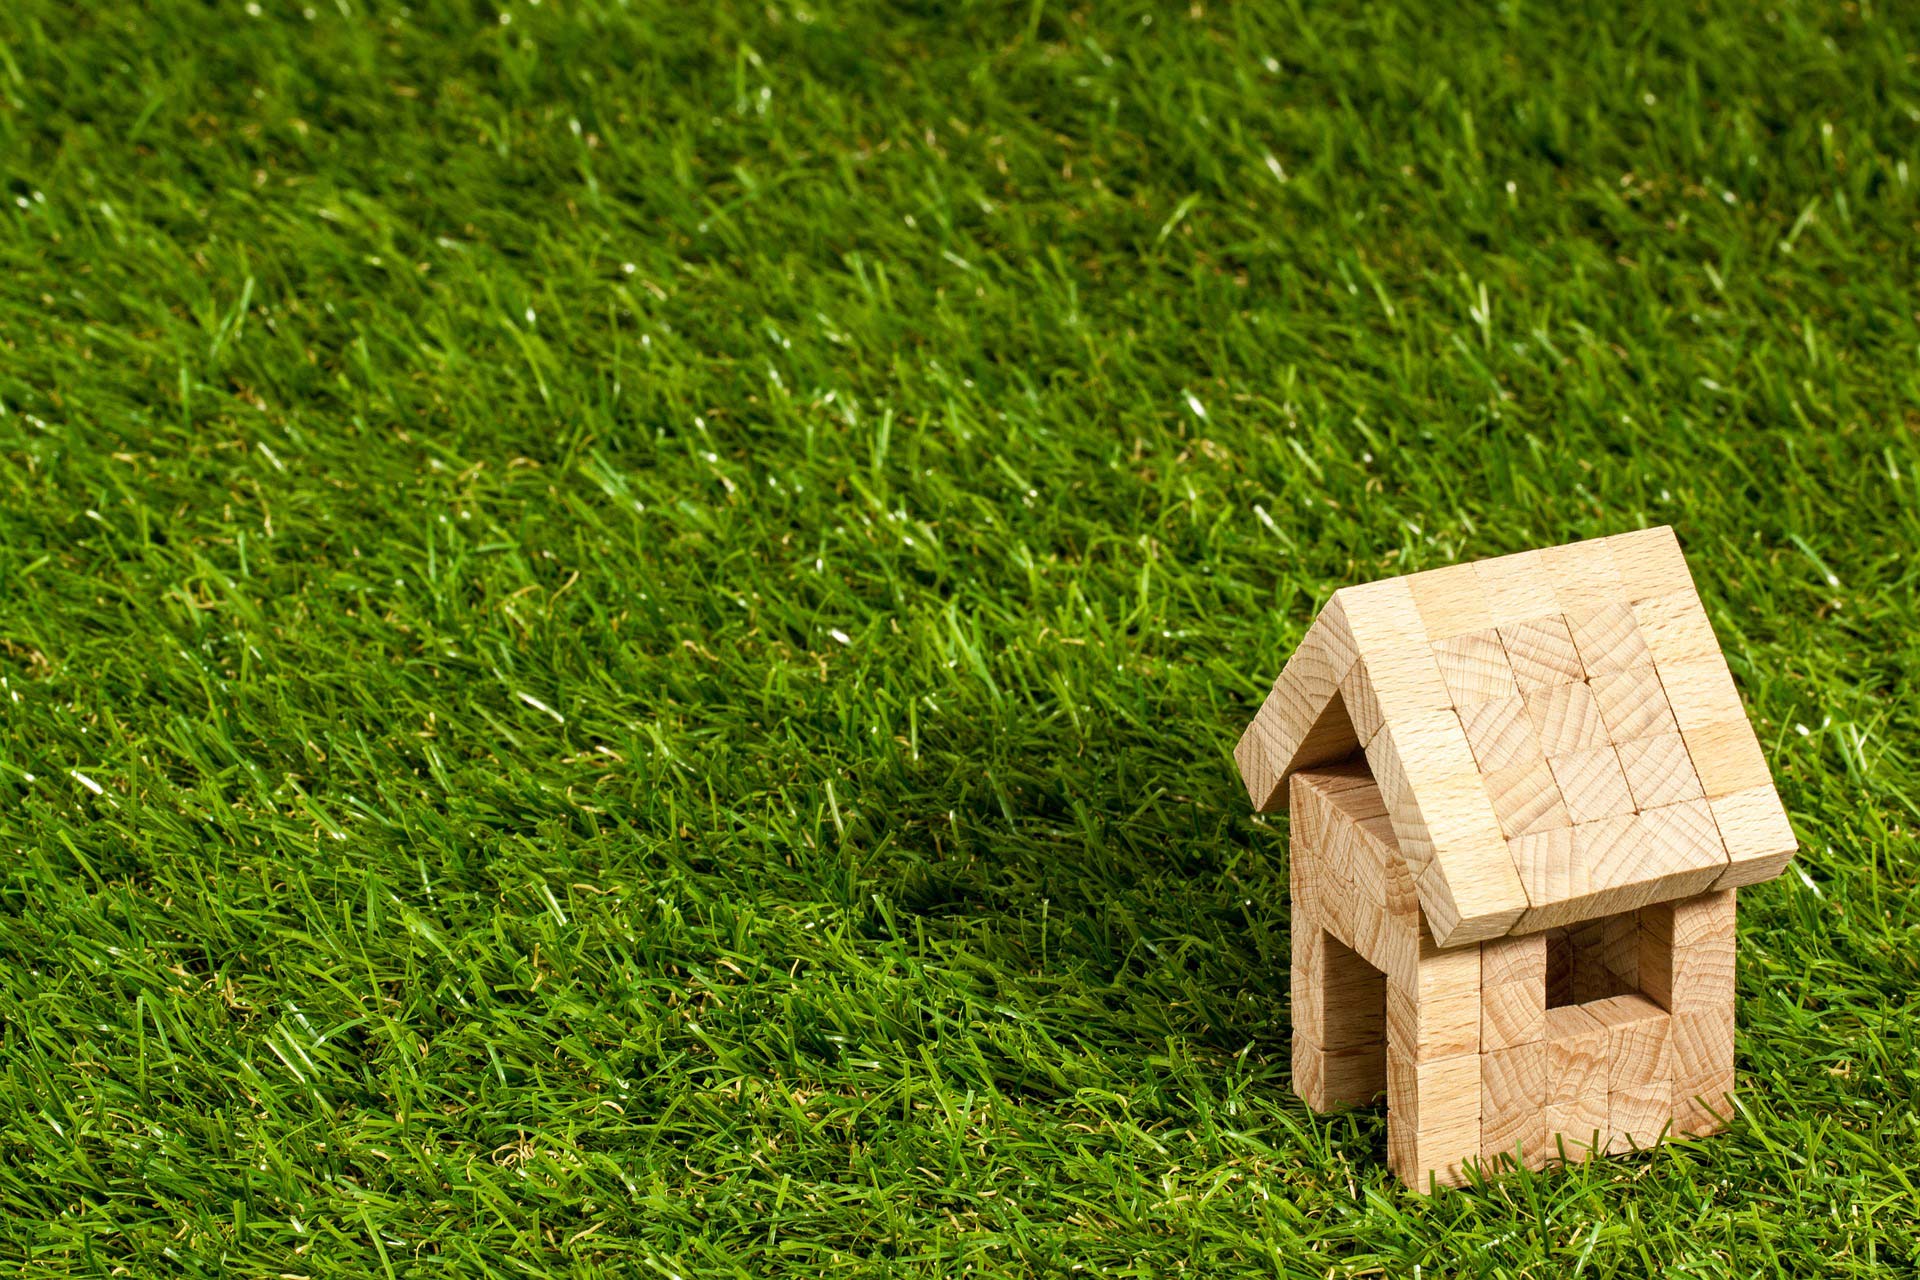 Block house on a patch of grass, Source: Pixabay